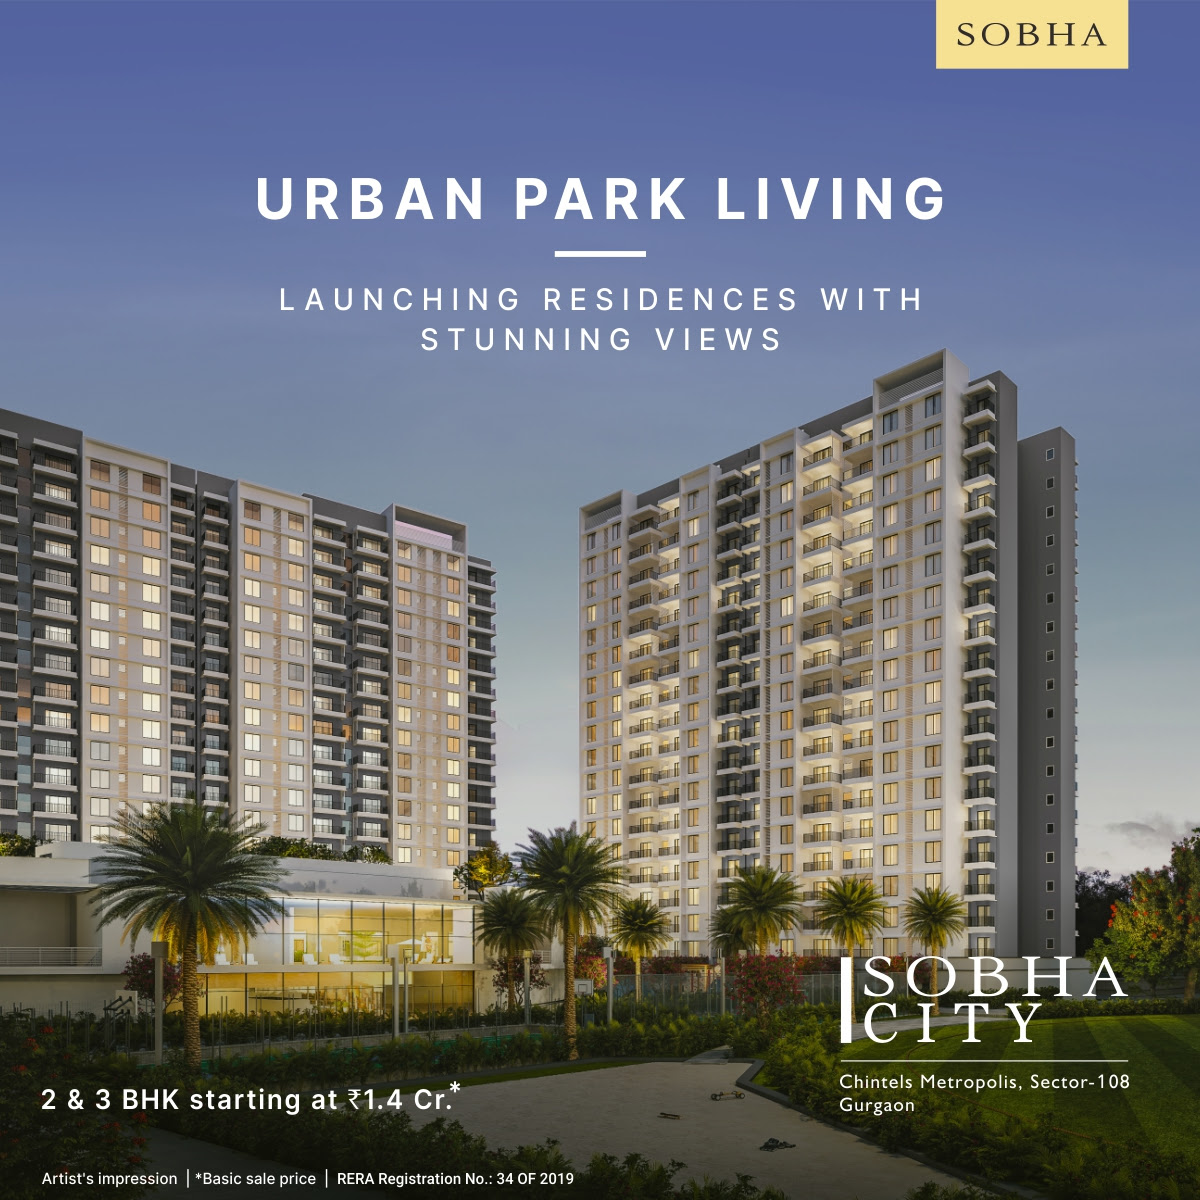 Launching residences with stunning views at Sobha City in Gurgaon Update